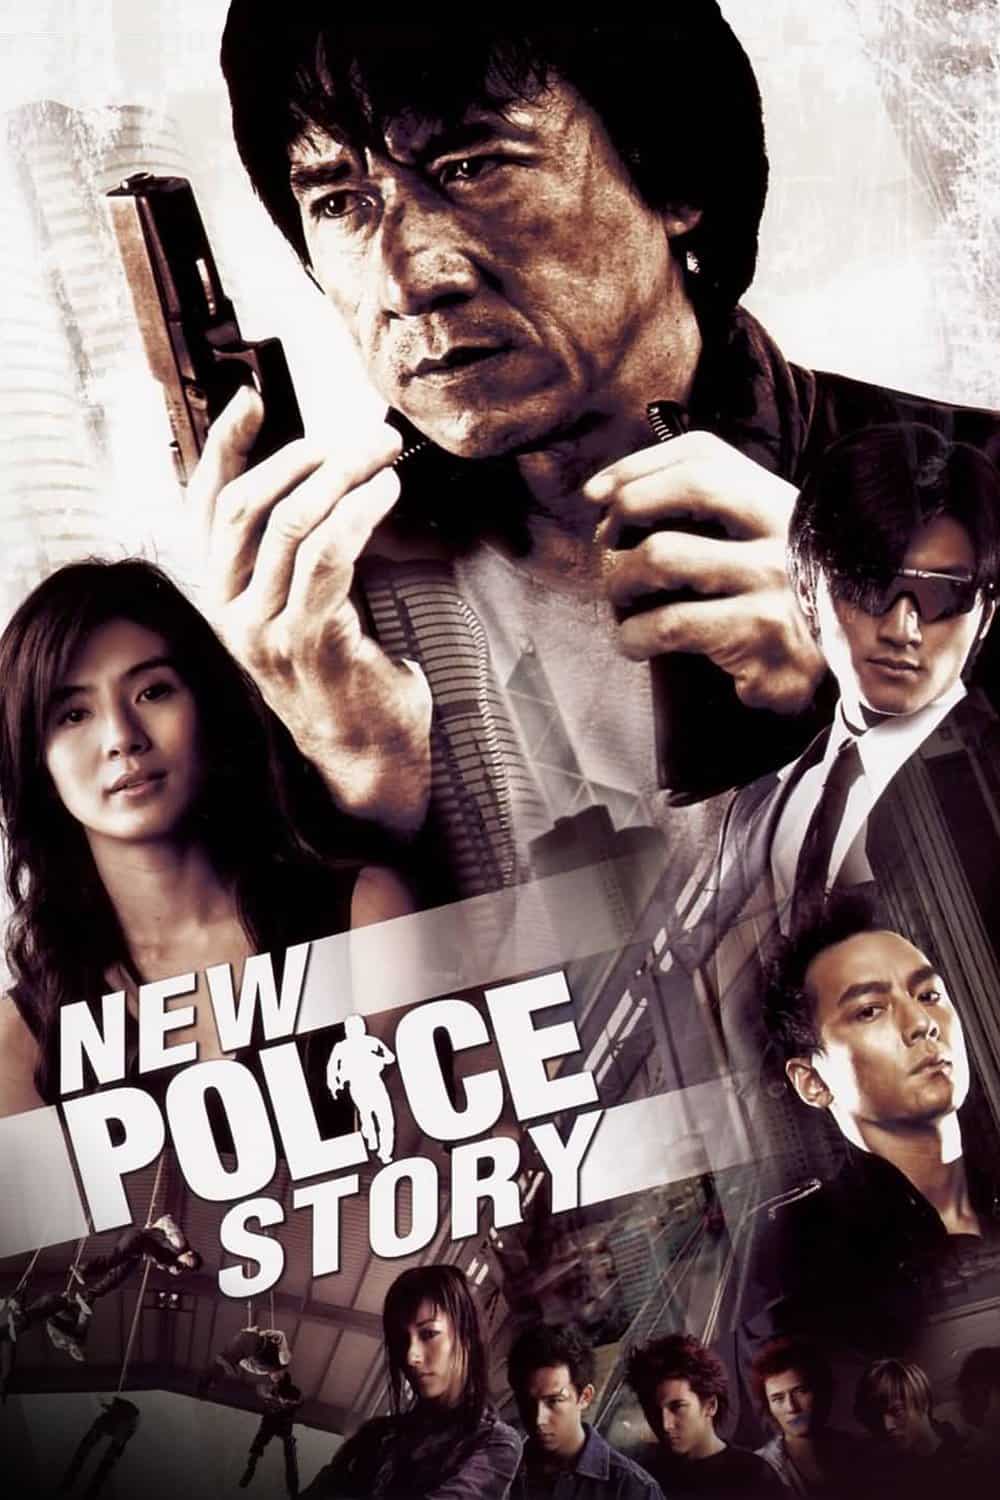 New Police Story, 2004 